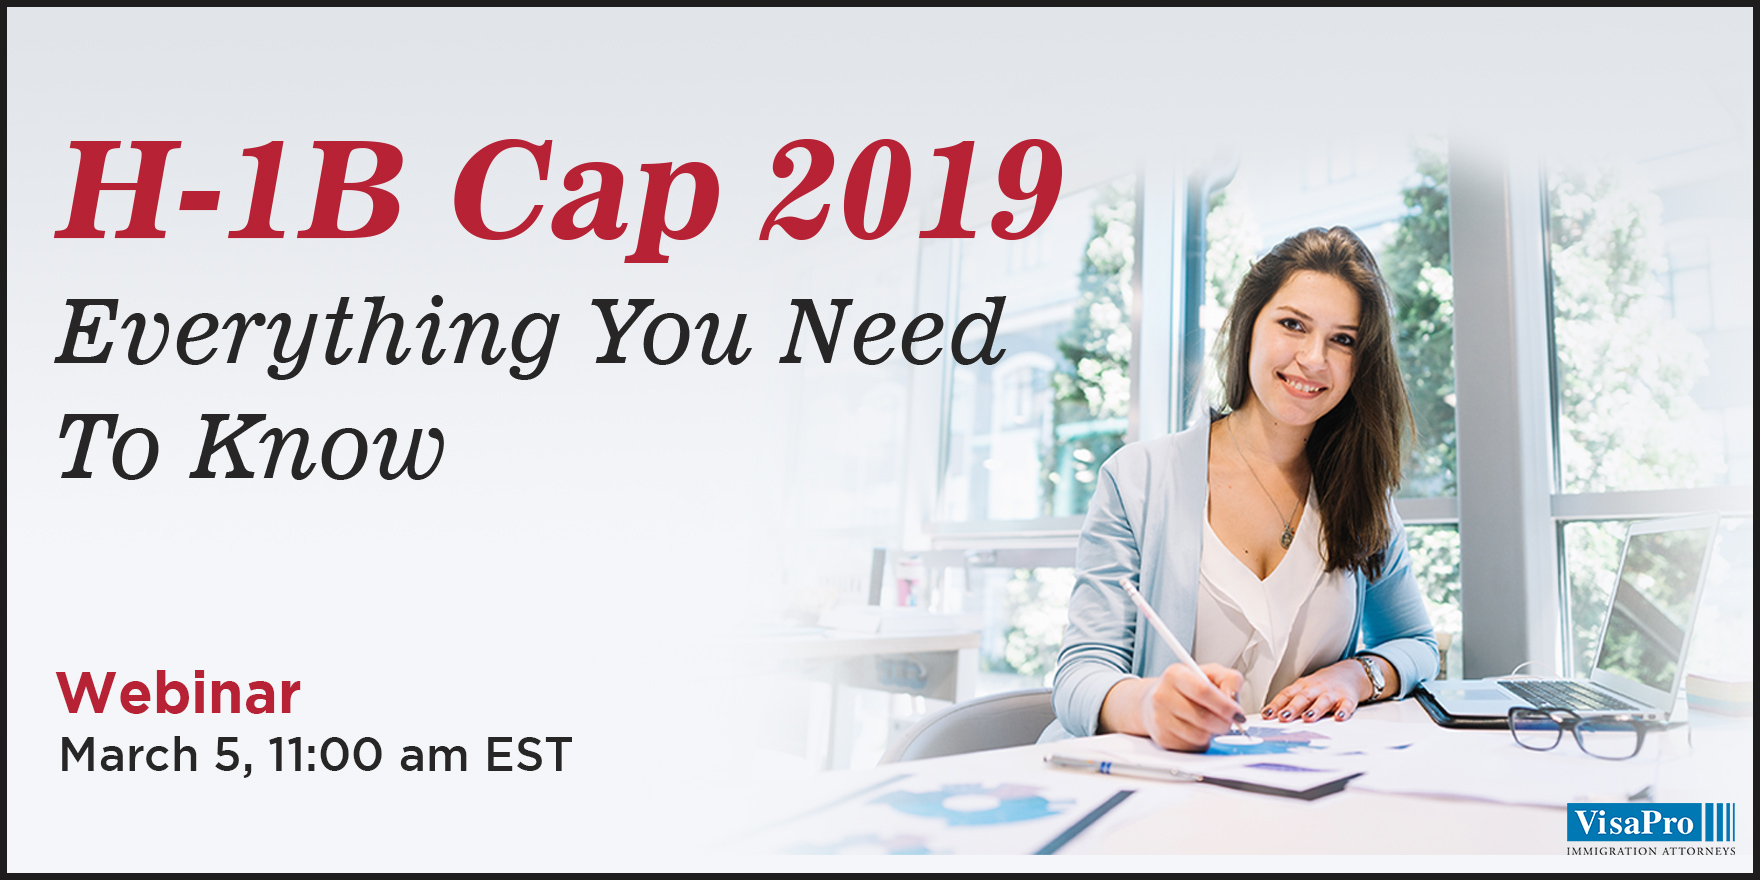 How To Plan For Your H-1B Cap 2019 Filings, Houston, Texas, United States